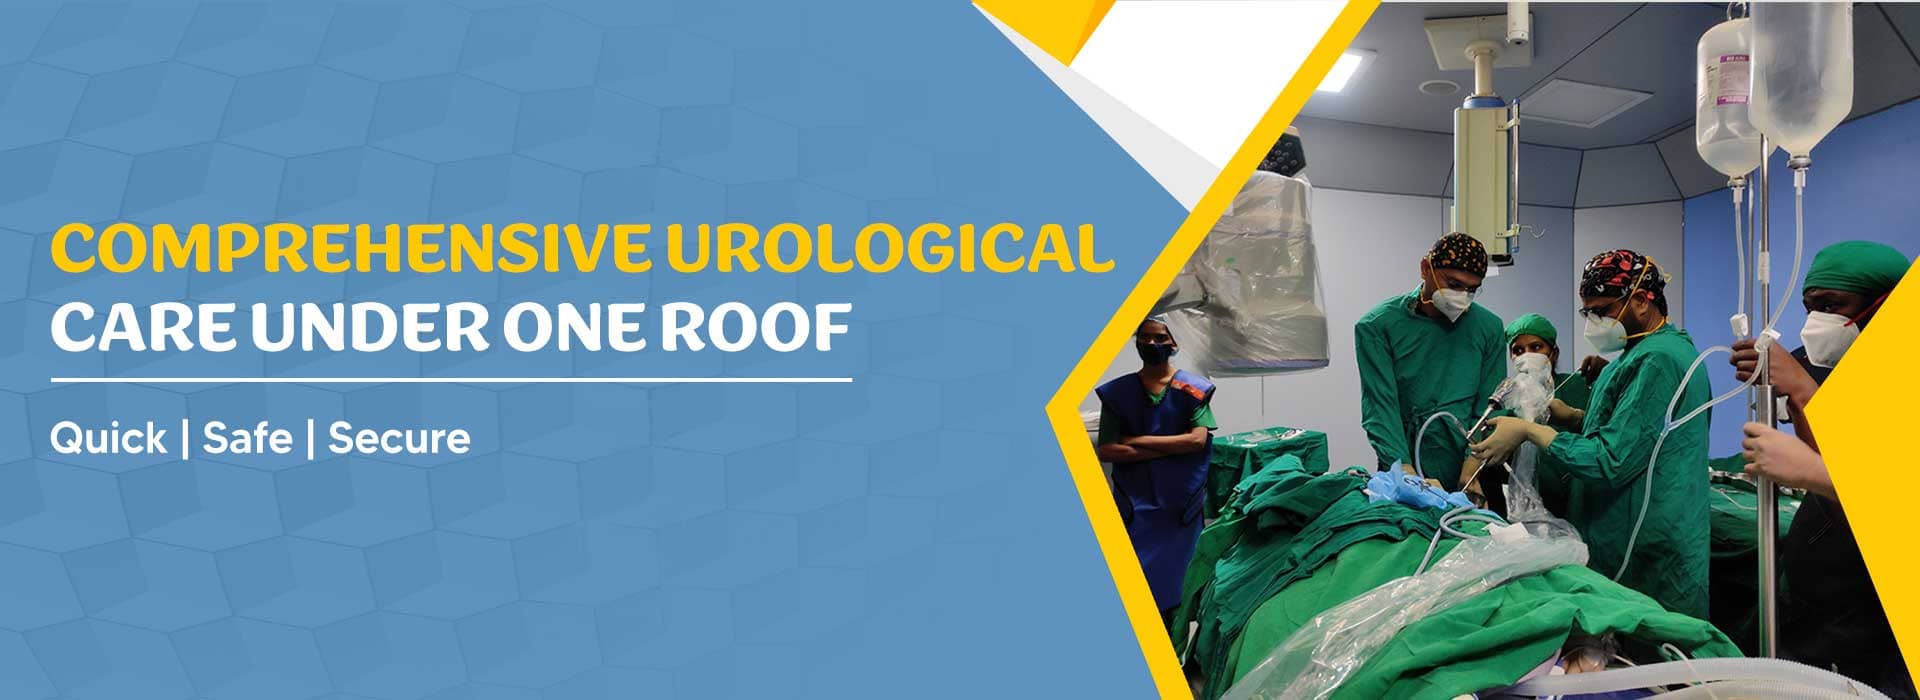 Best treatment for urinary problems at MITR Urology Associates and Hospital in Navi Mumbai, with centres at Panvel, Kharghar, Ulwe, and Vashi.